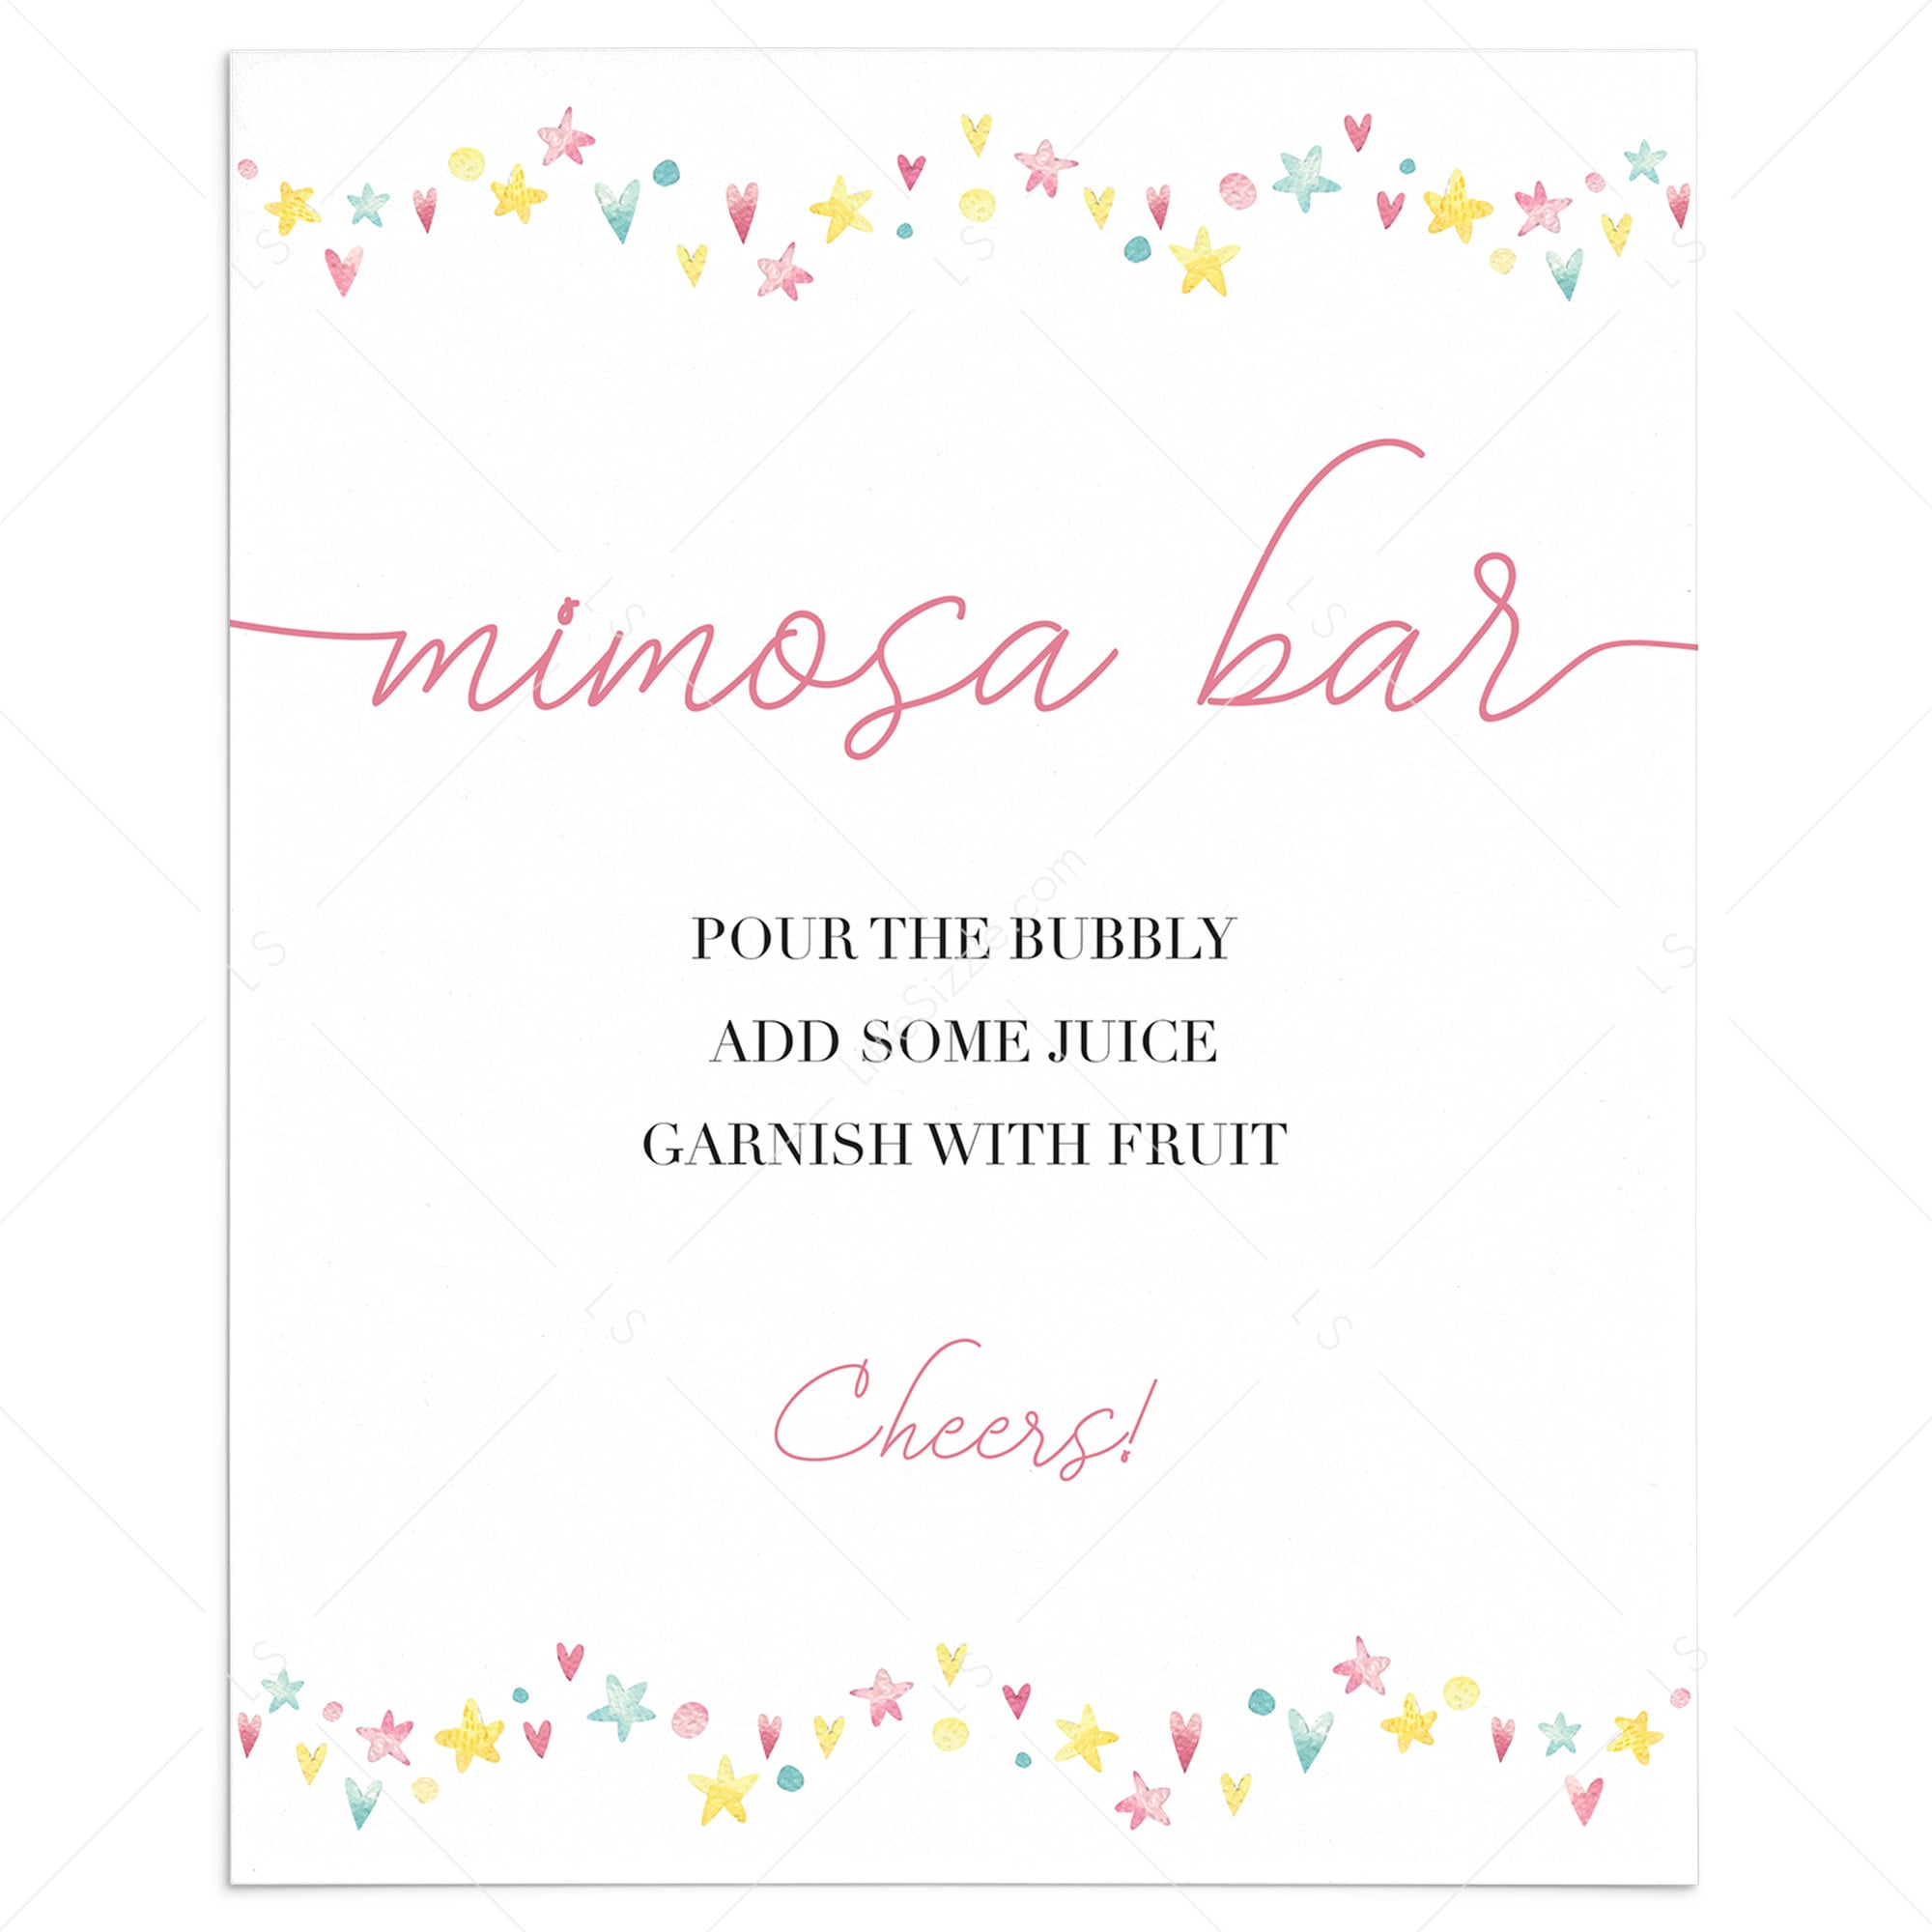 Pink and yellow sign for mimosa bar download by LittleSizzle